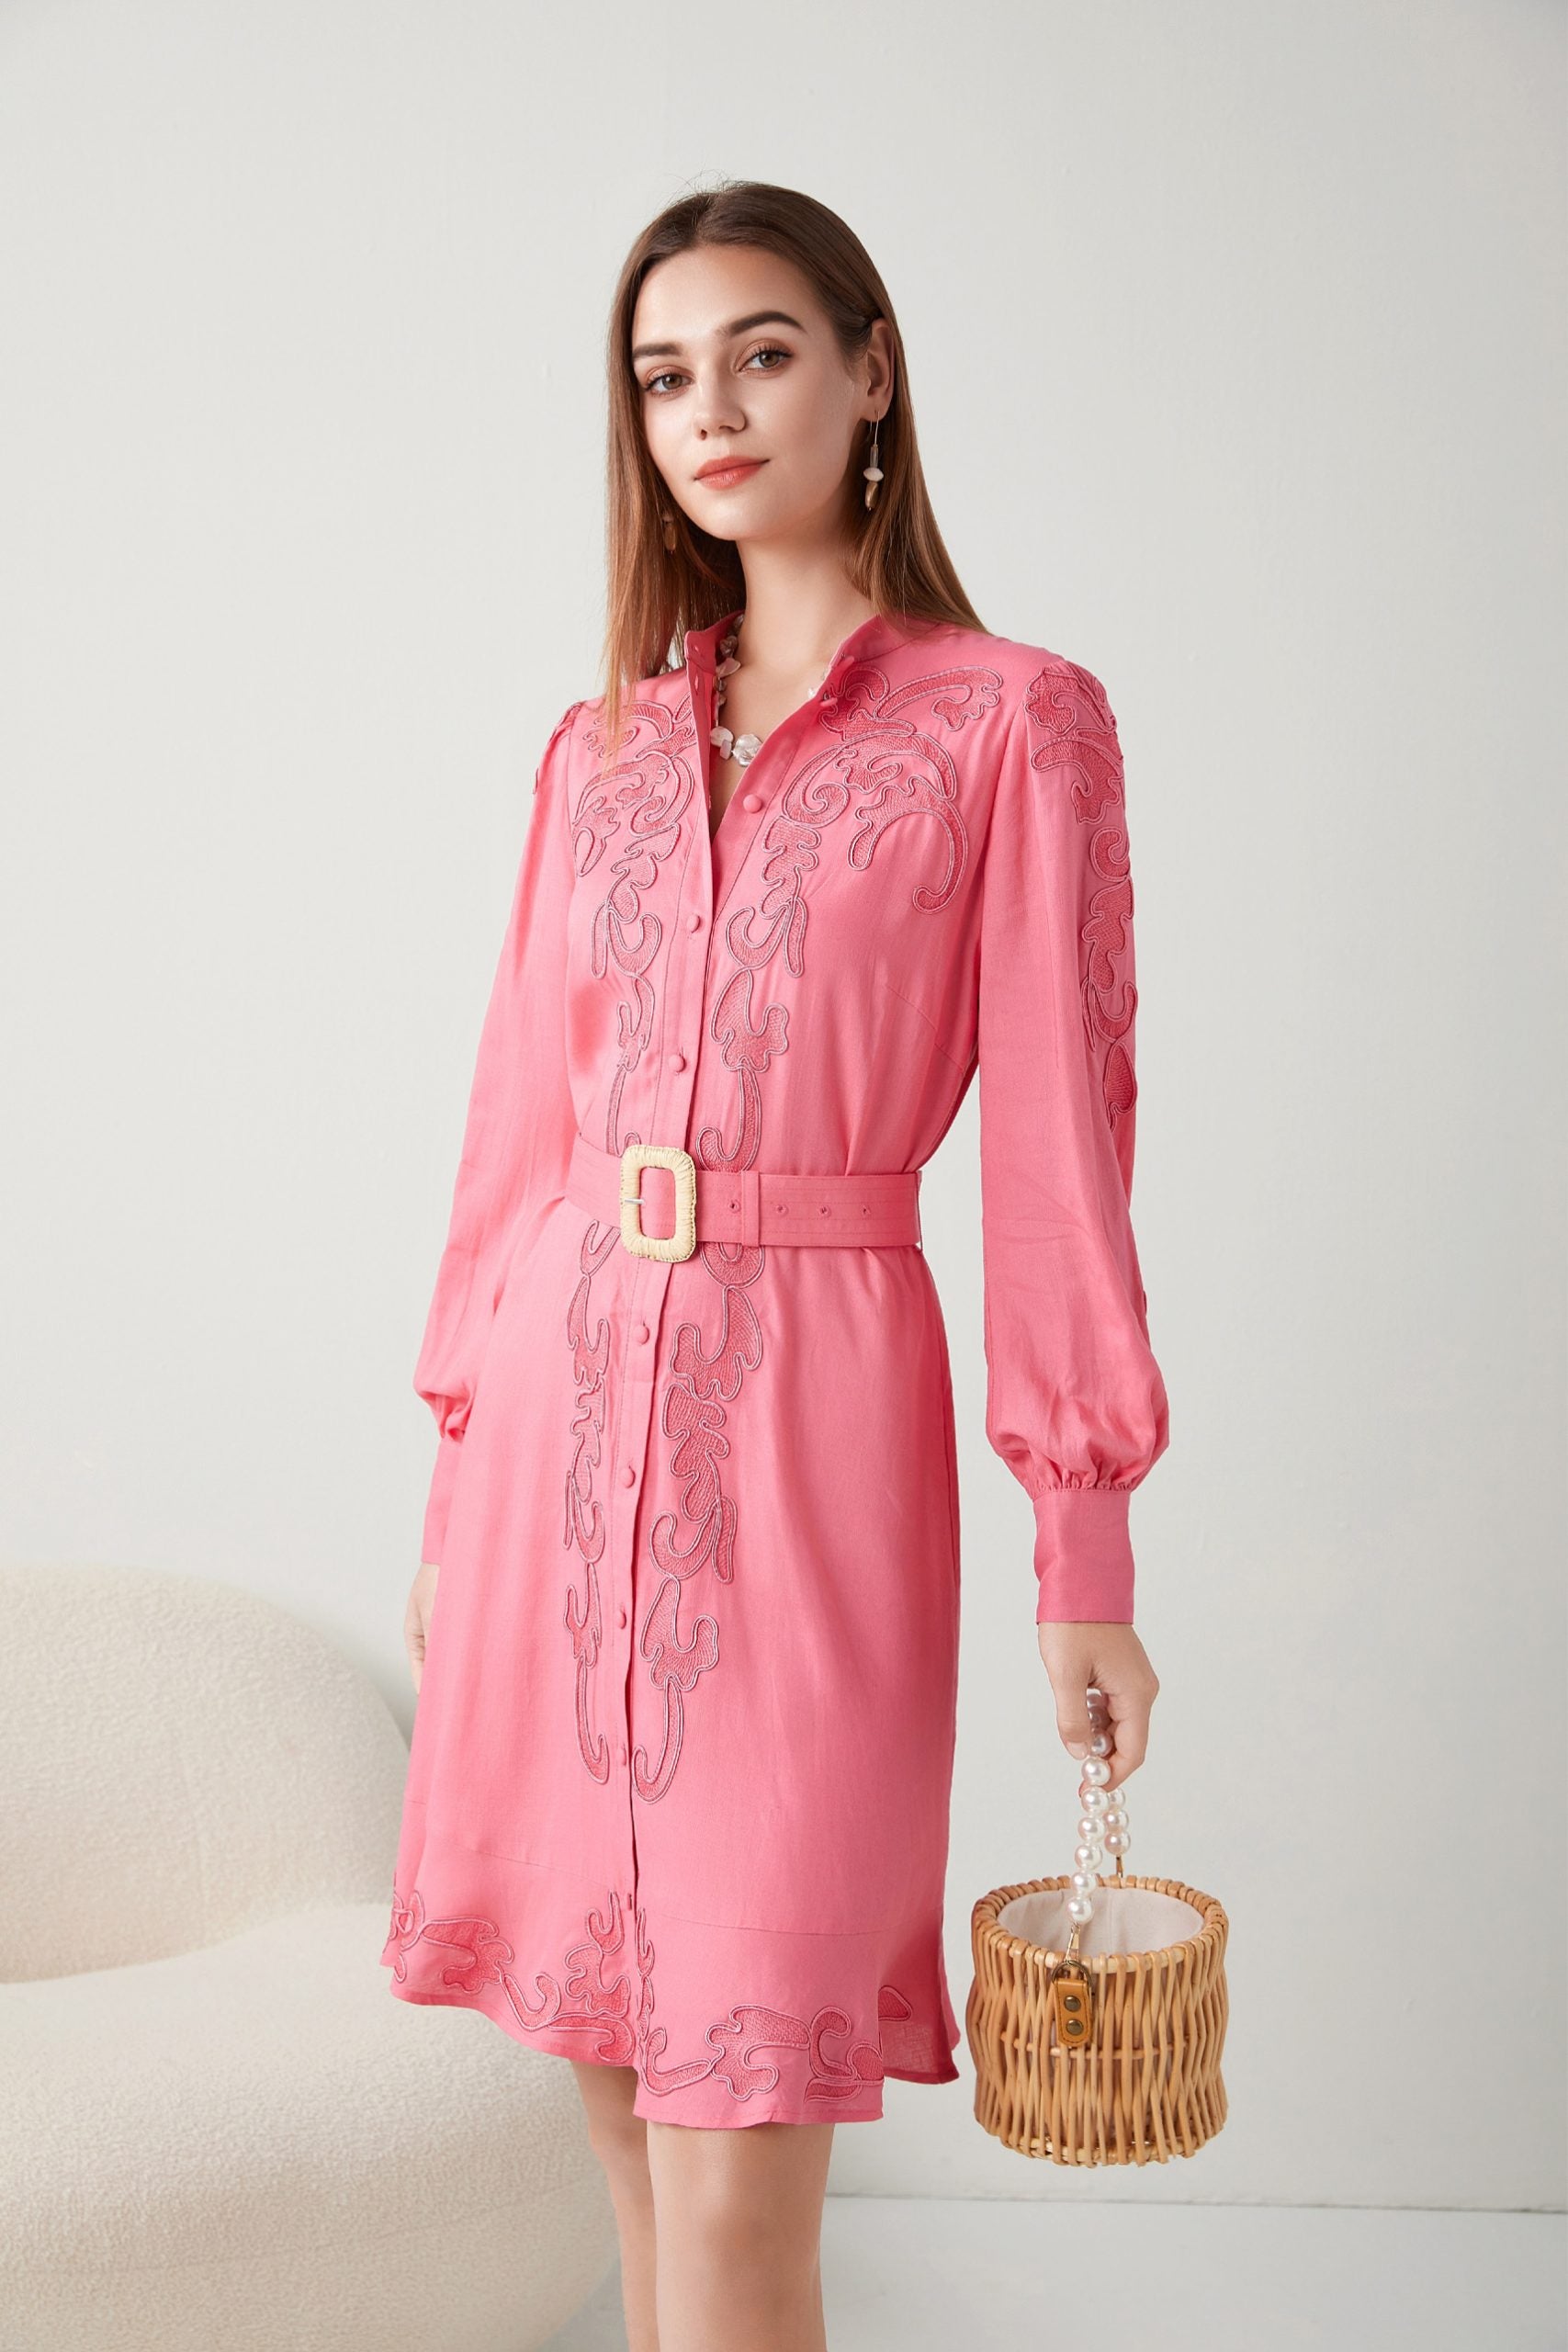 "Step into spring with our stunning pink dress, adorned with delicate floral embroidery. Embrace femininity with every step